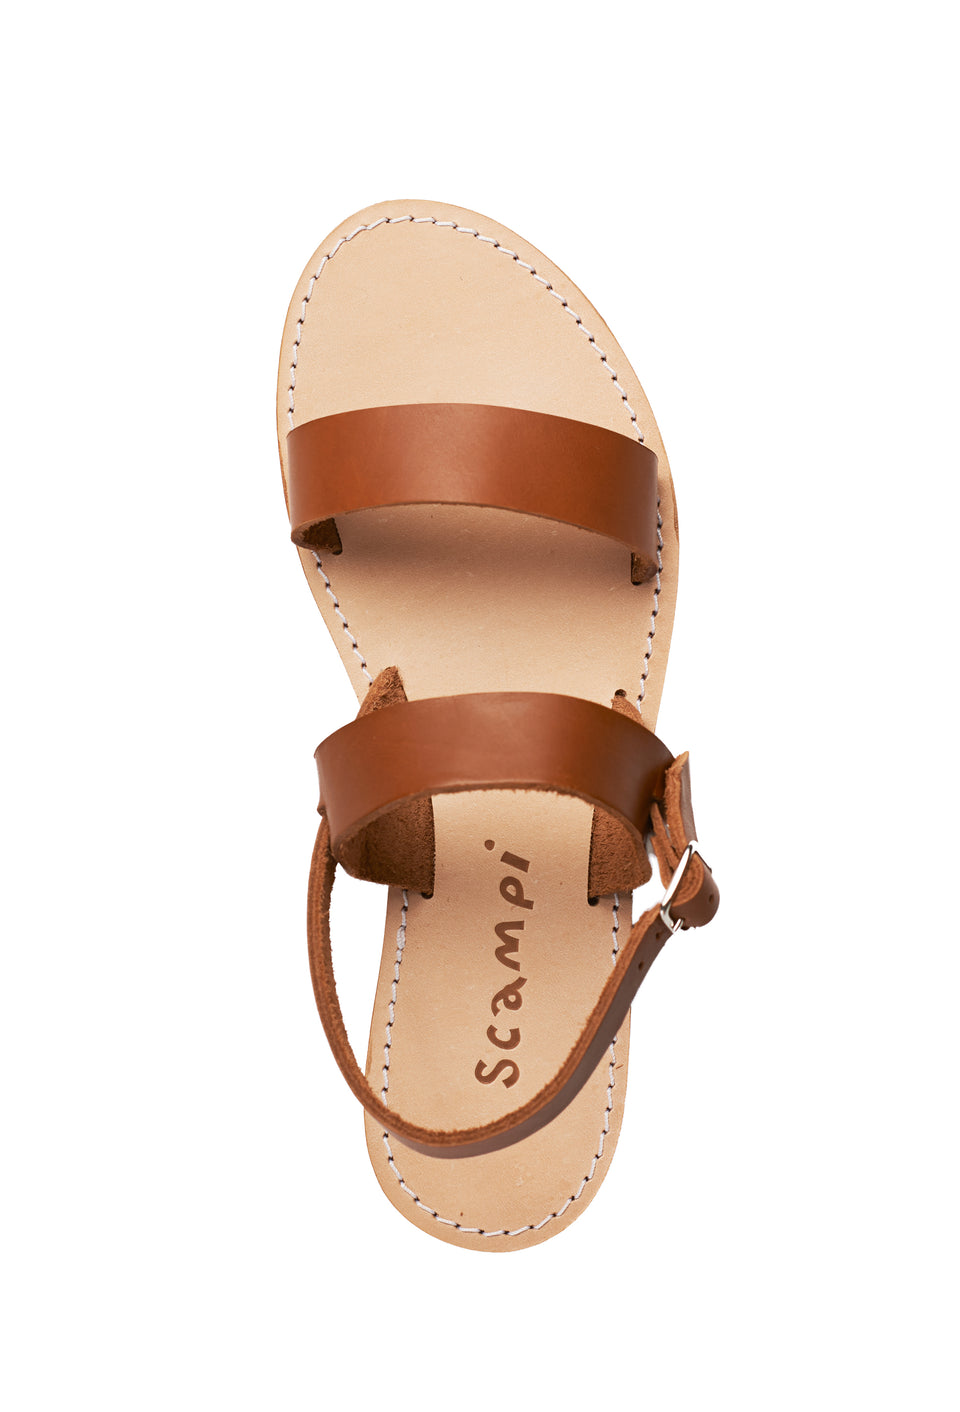 LEATHER SANDAL-BROWN LEATHER